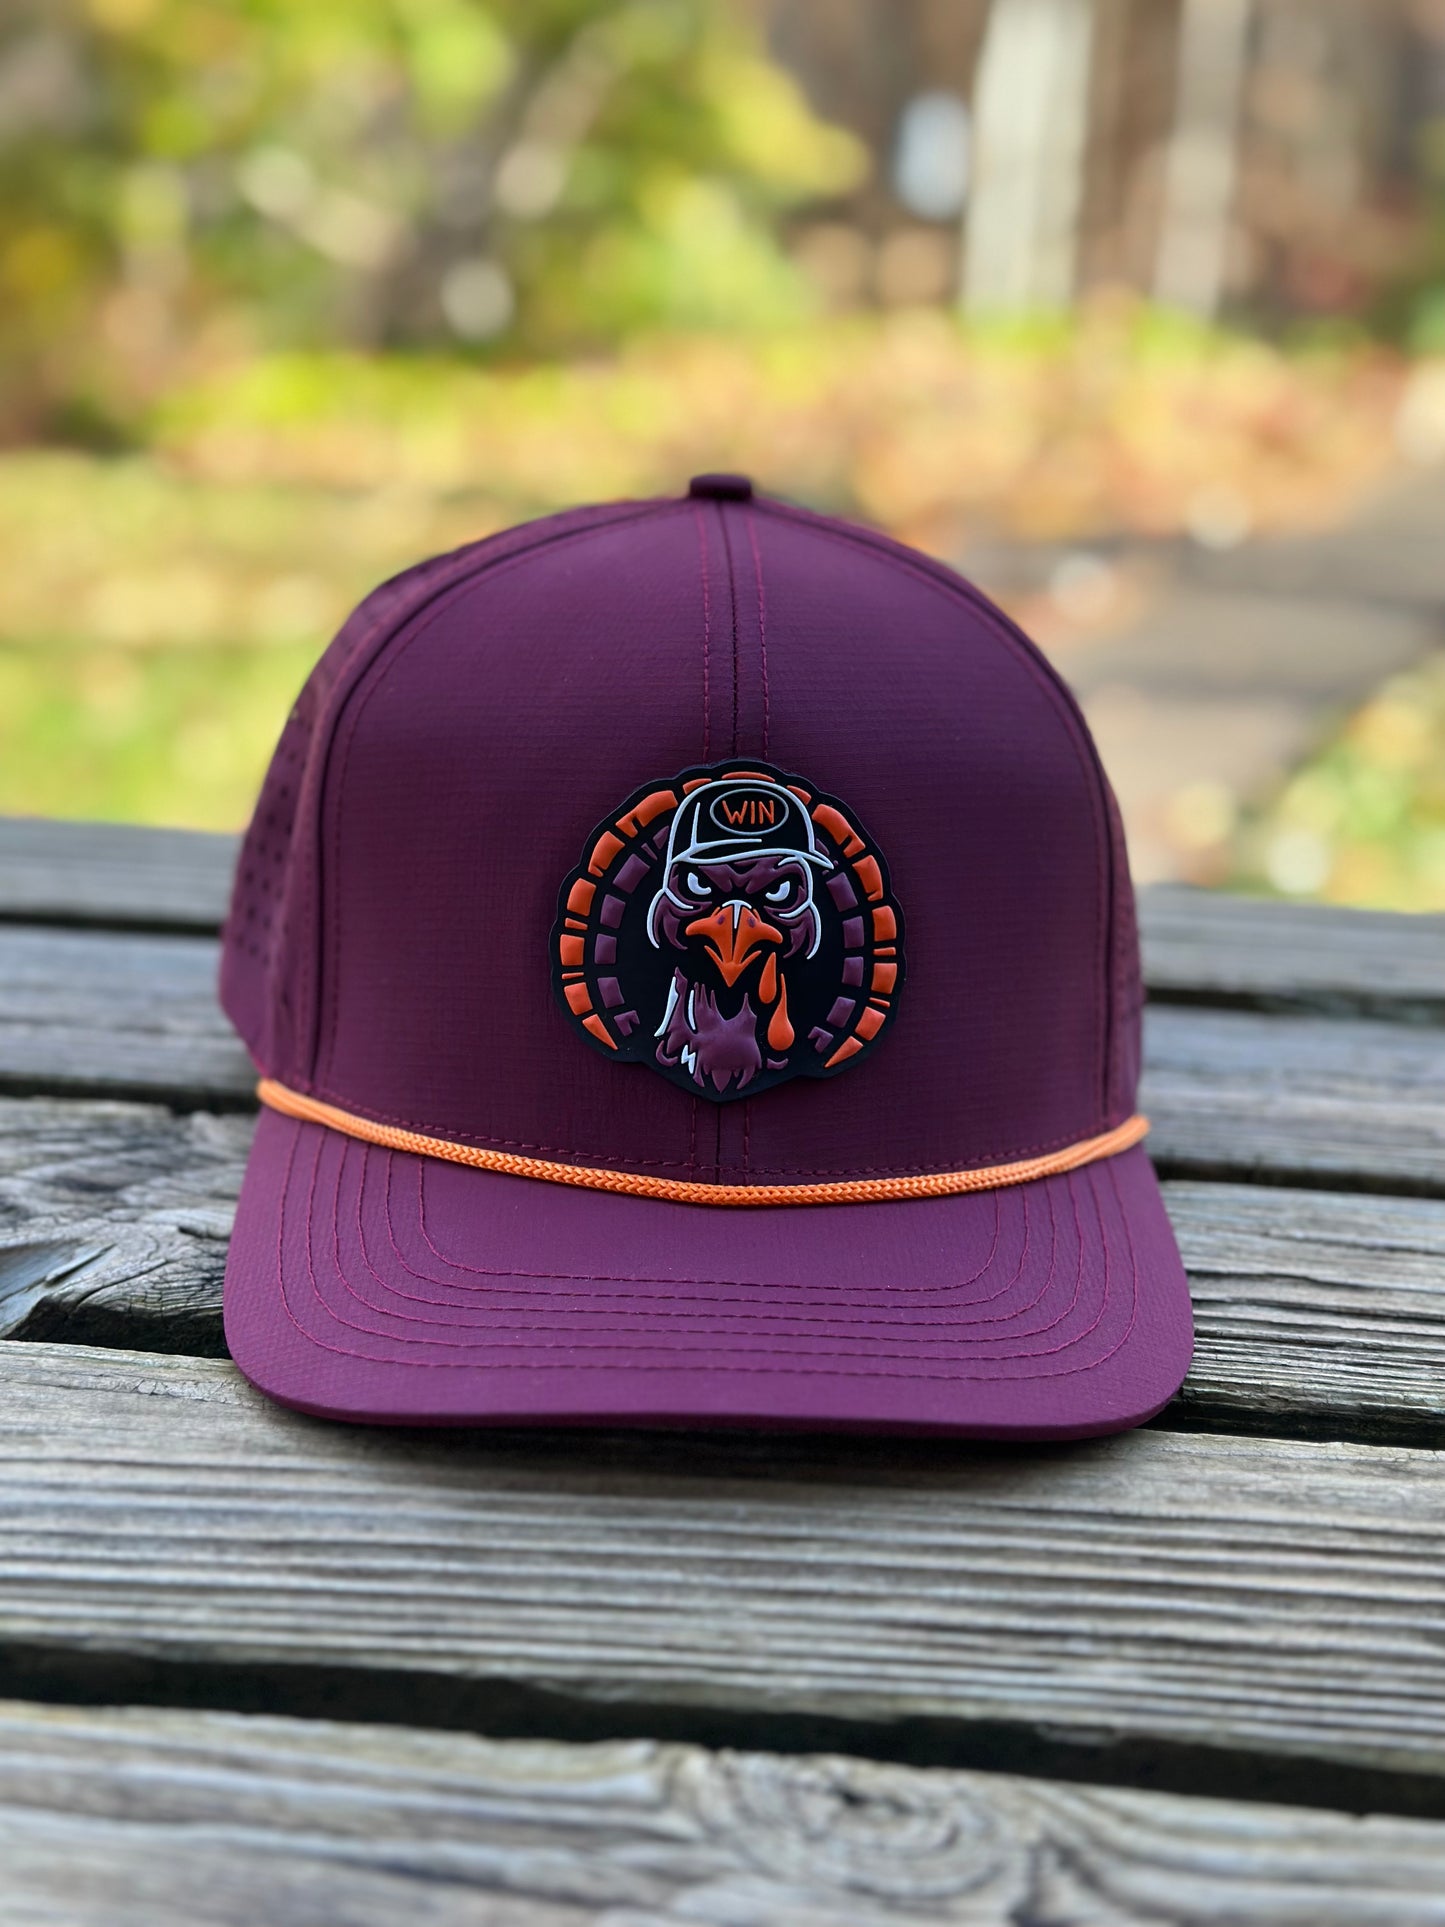 Turkey with WIN Rubber Patch Hat - Performance (LIMITED EDITION)